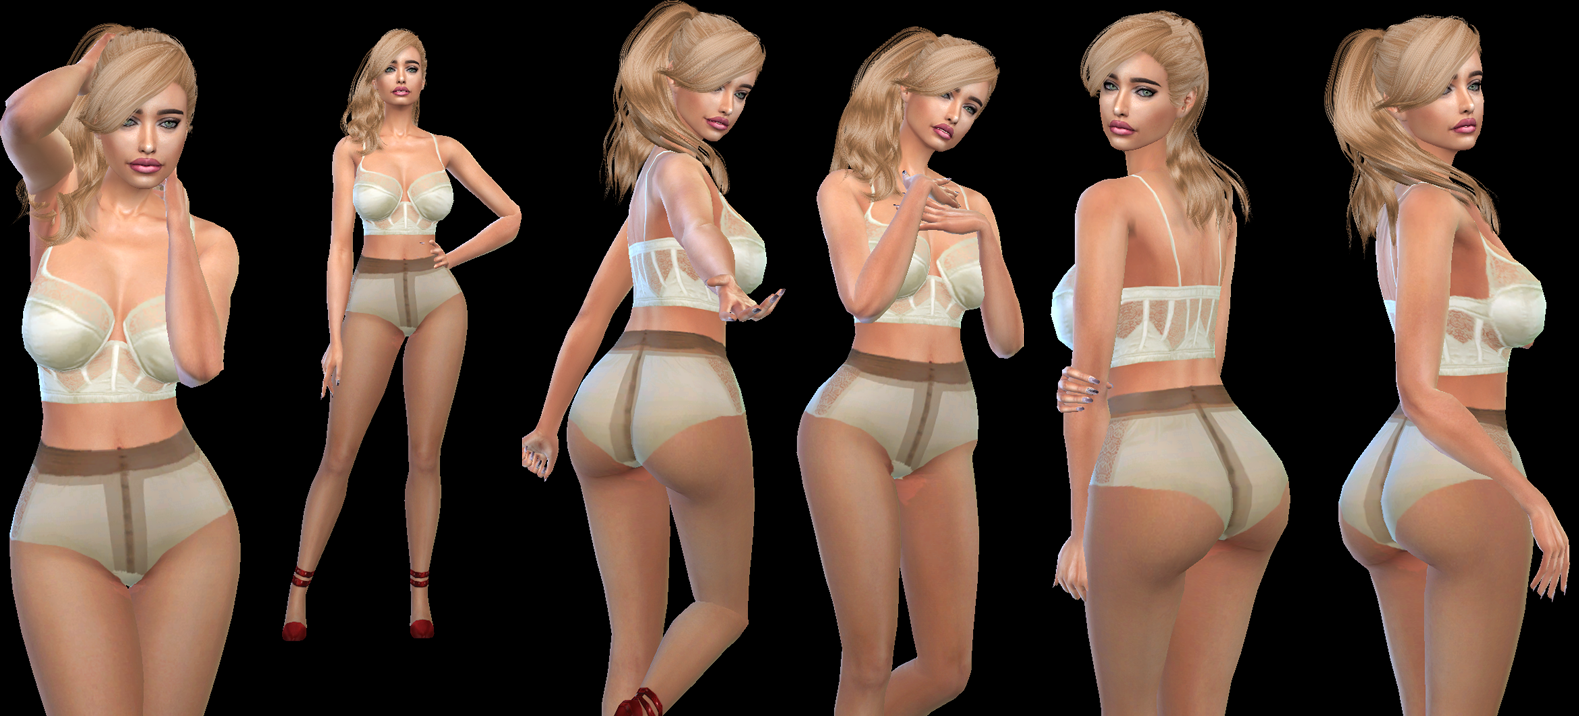 1833518464_pantyhousethesims4.png.50a7cd0948fa36dea7df26aadd09b150.png